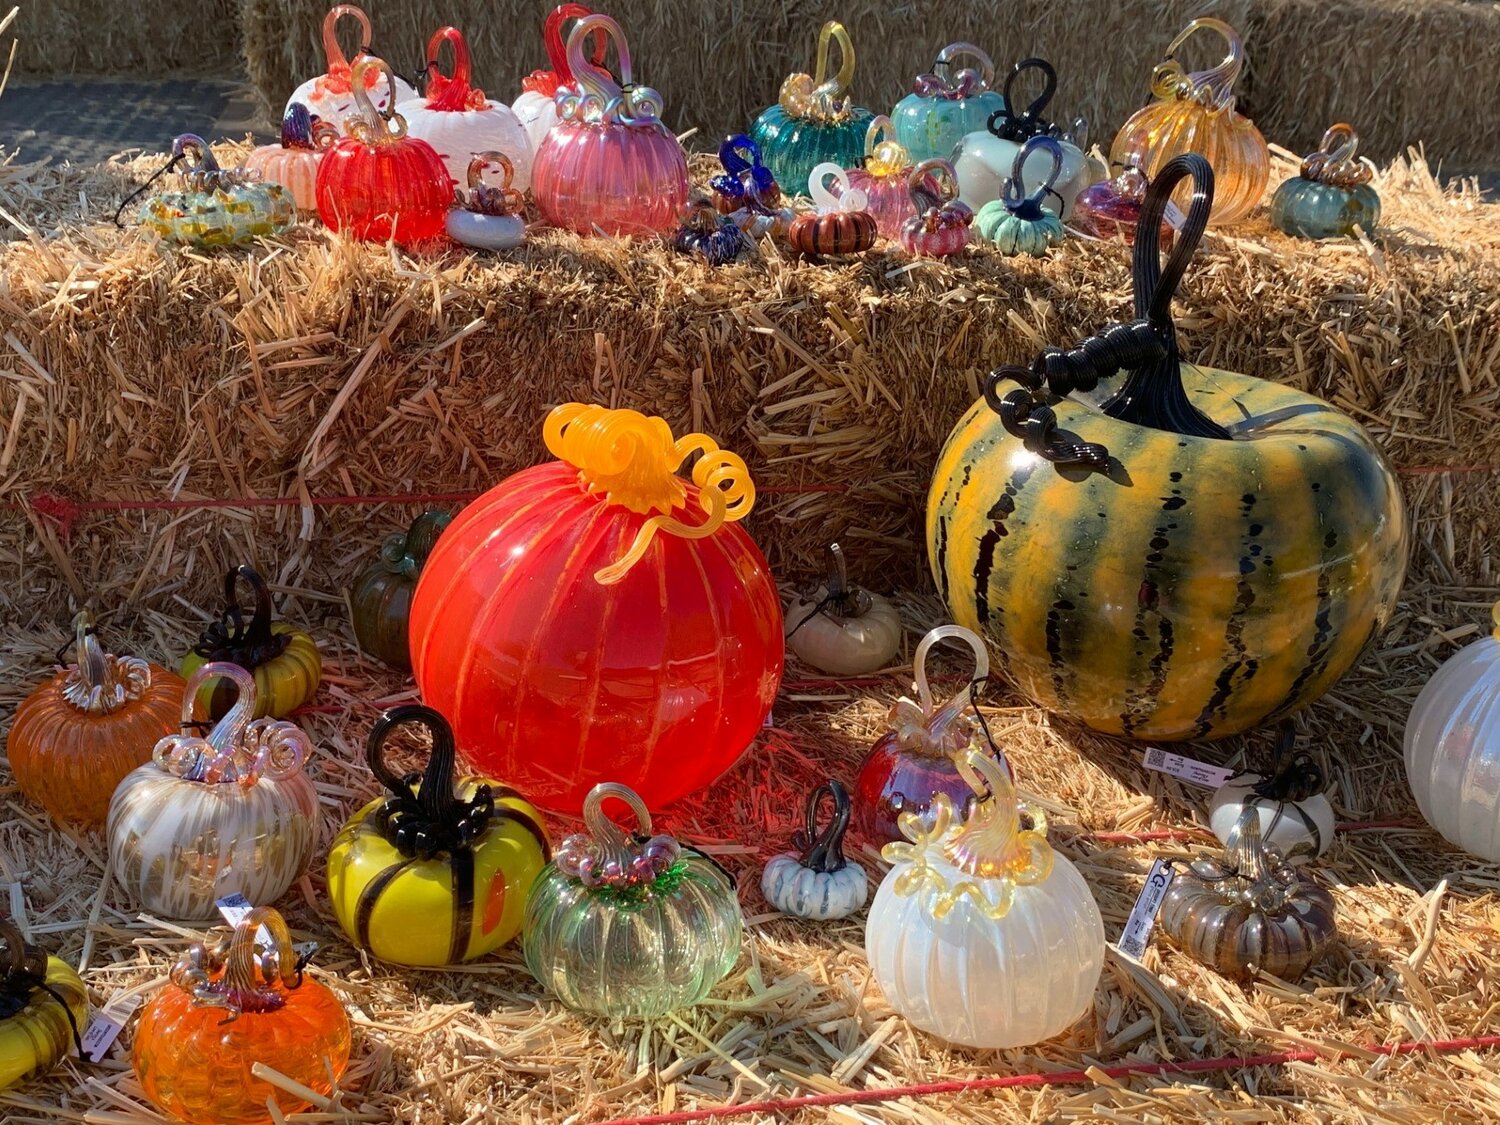 The Glass Pumpkin Patch will feature more than 1,000 glass pumpkins handmade by artist Gregory Tomb and available for purchase.